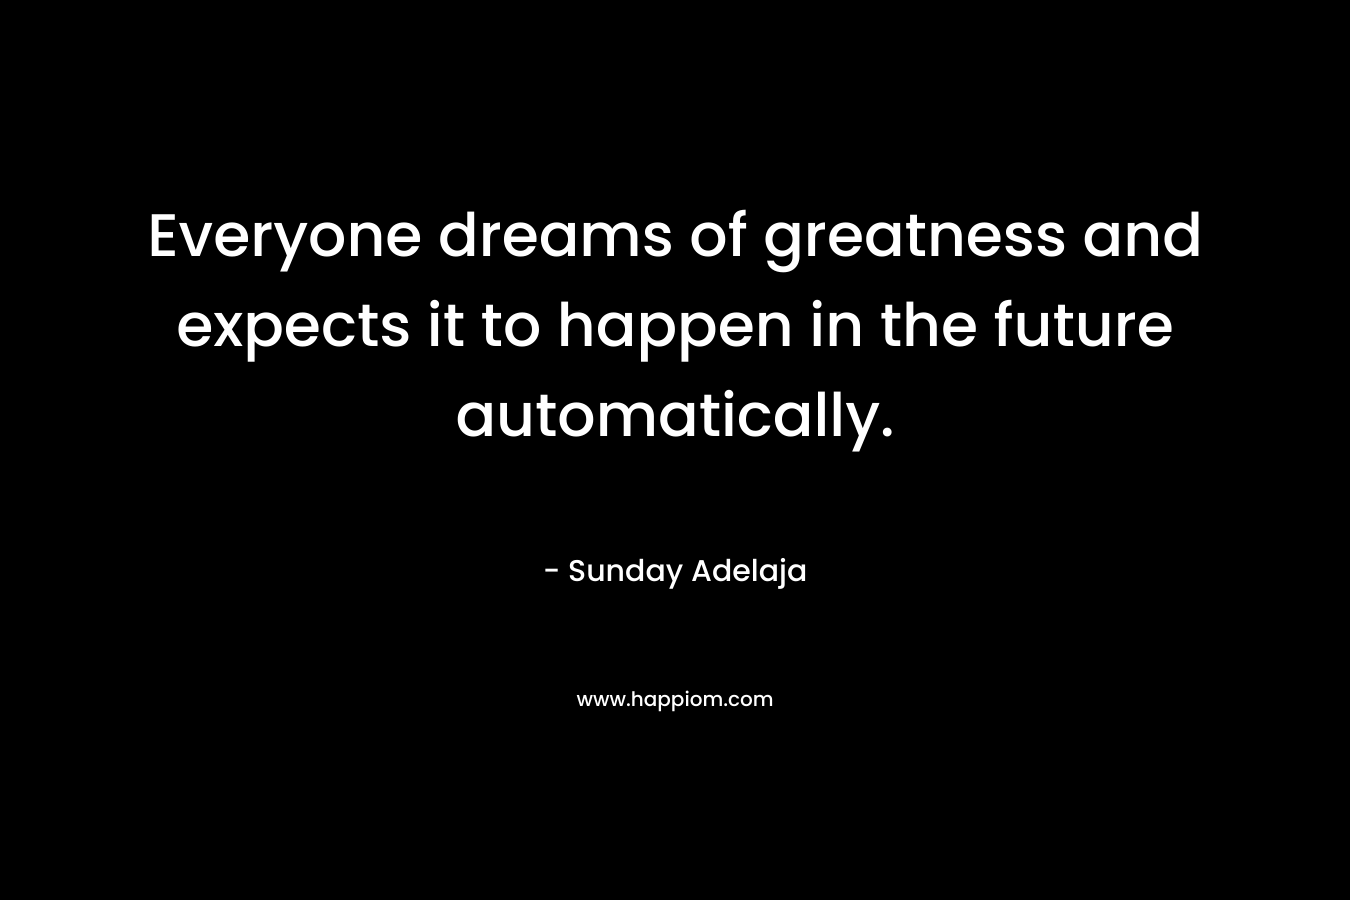 Everyone dreams of greatness and expects it to happen in the future automatically.